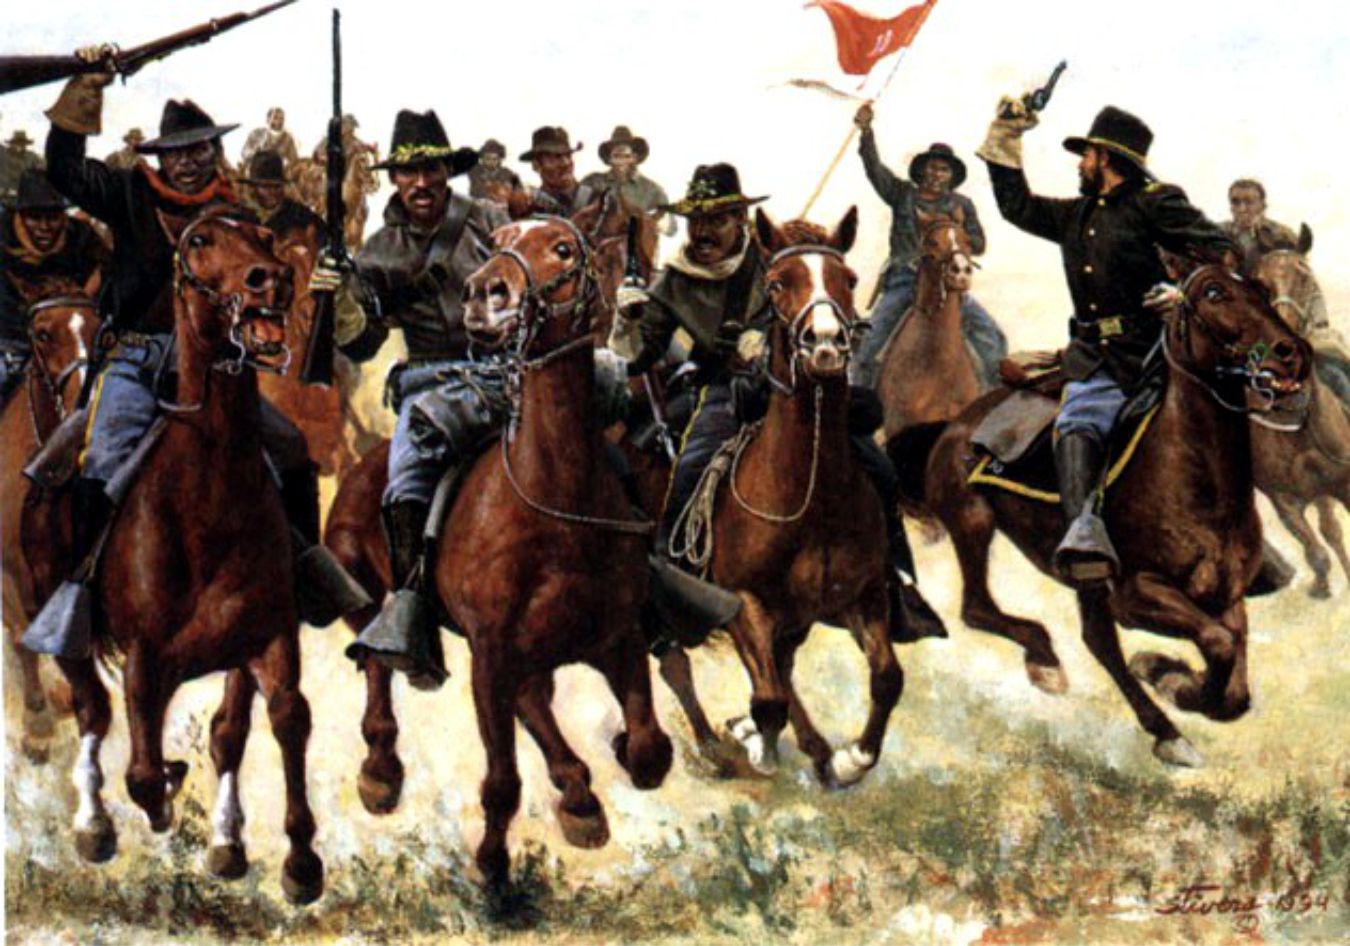 Buffalo Soldiers-Painting By Don Stivers  Troop A Tenth Cavalry led by Captain Nicholas A. Nolan at the Battle of Rattlesnake Springs,Texas August 6, 1880. 